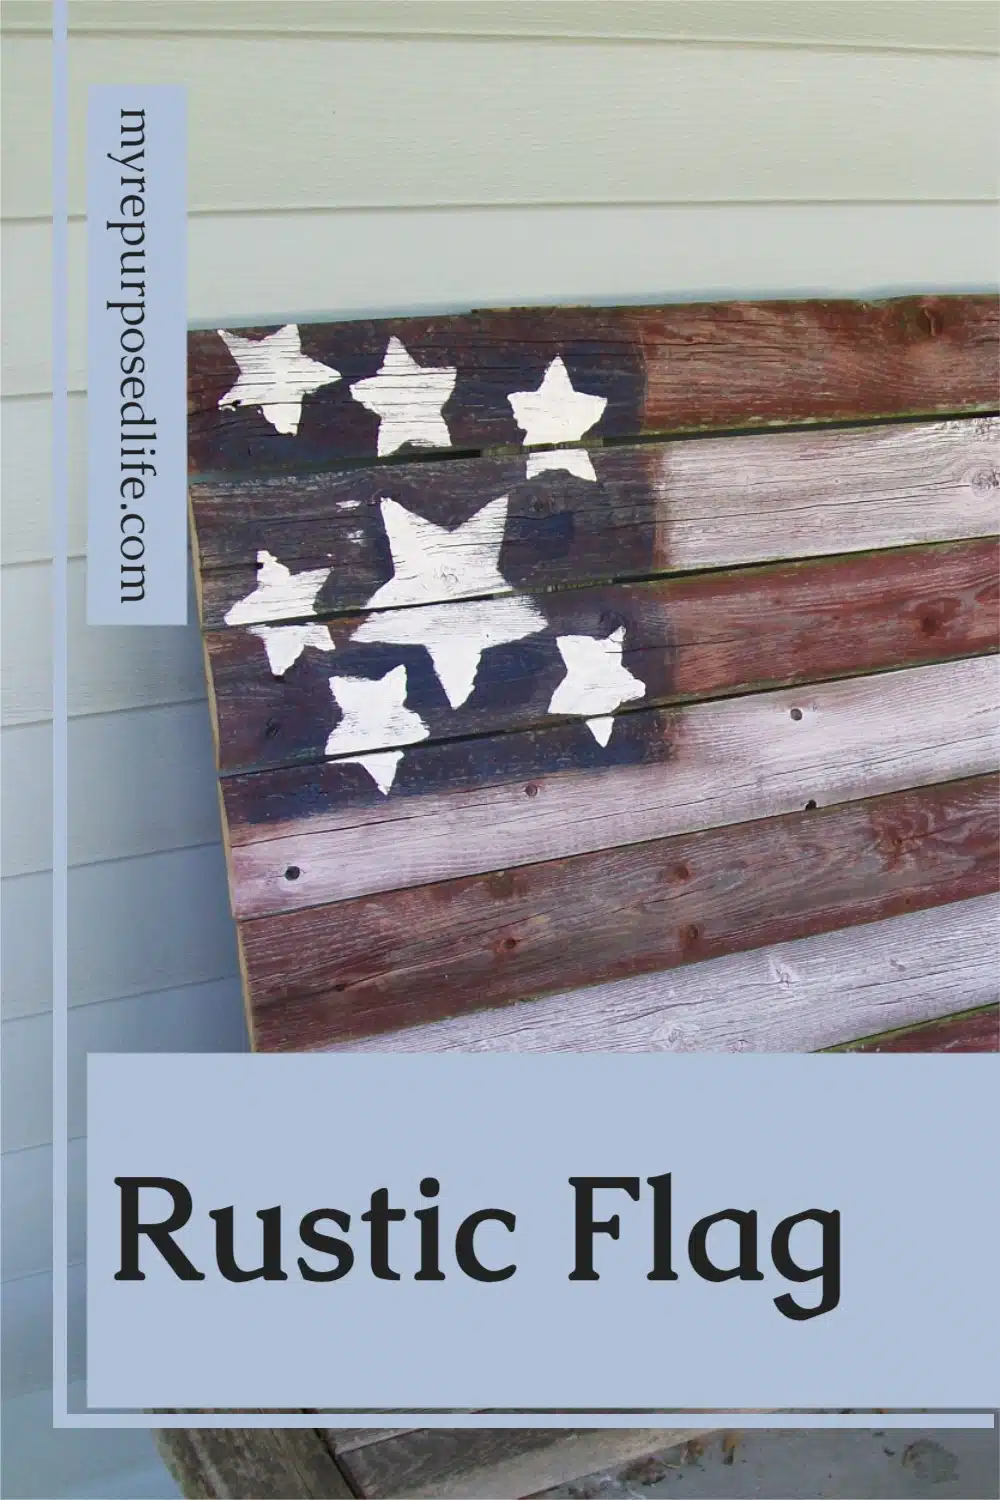 How to make a rustic flag out of bits and pieces of old gray picket fencing. Easy afternoon project to make with the kids or grandkids. #MyRepurposedLife #upcycled #fence #rustic #flag #4thofjuly #patriotic #decor via @repurposedlife